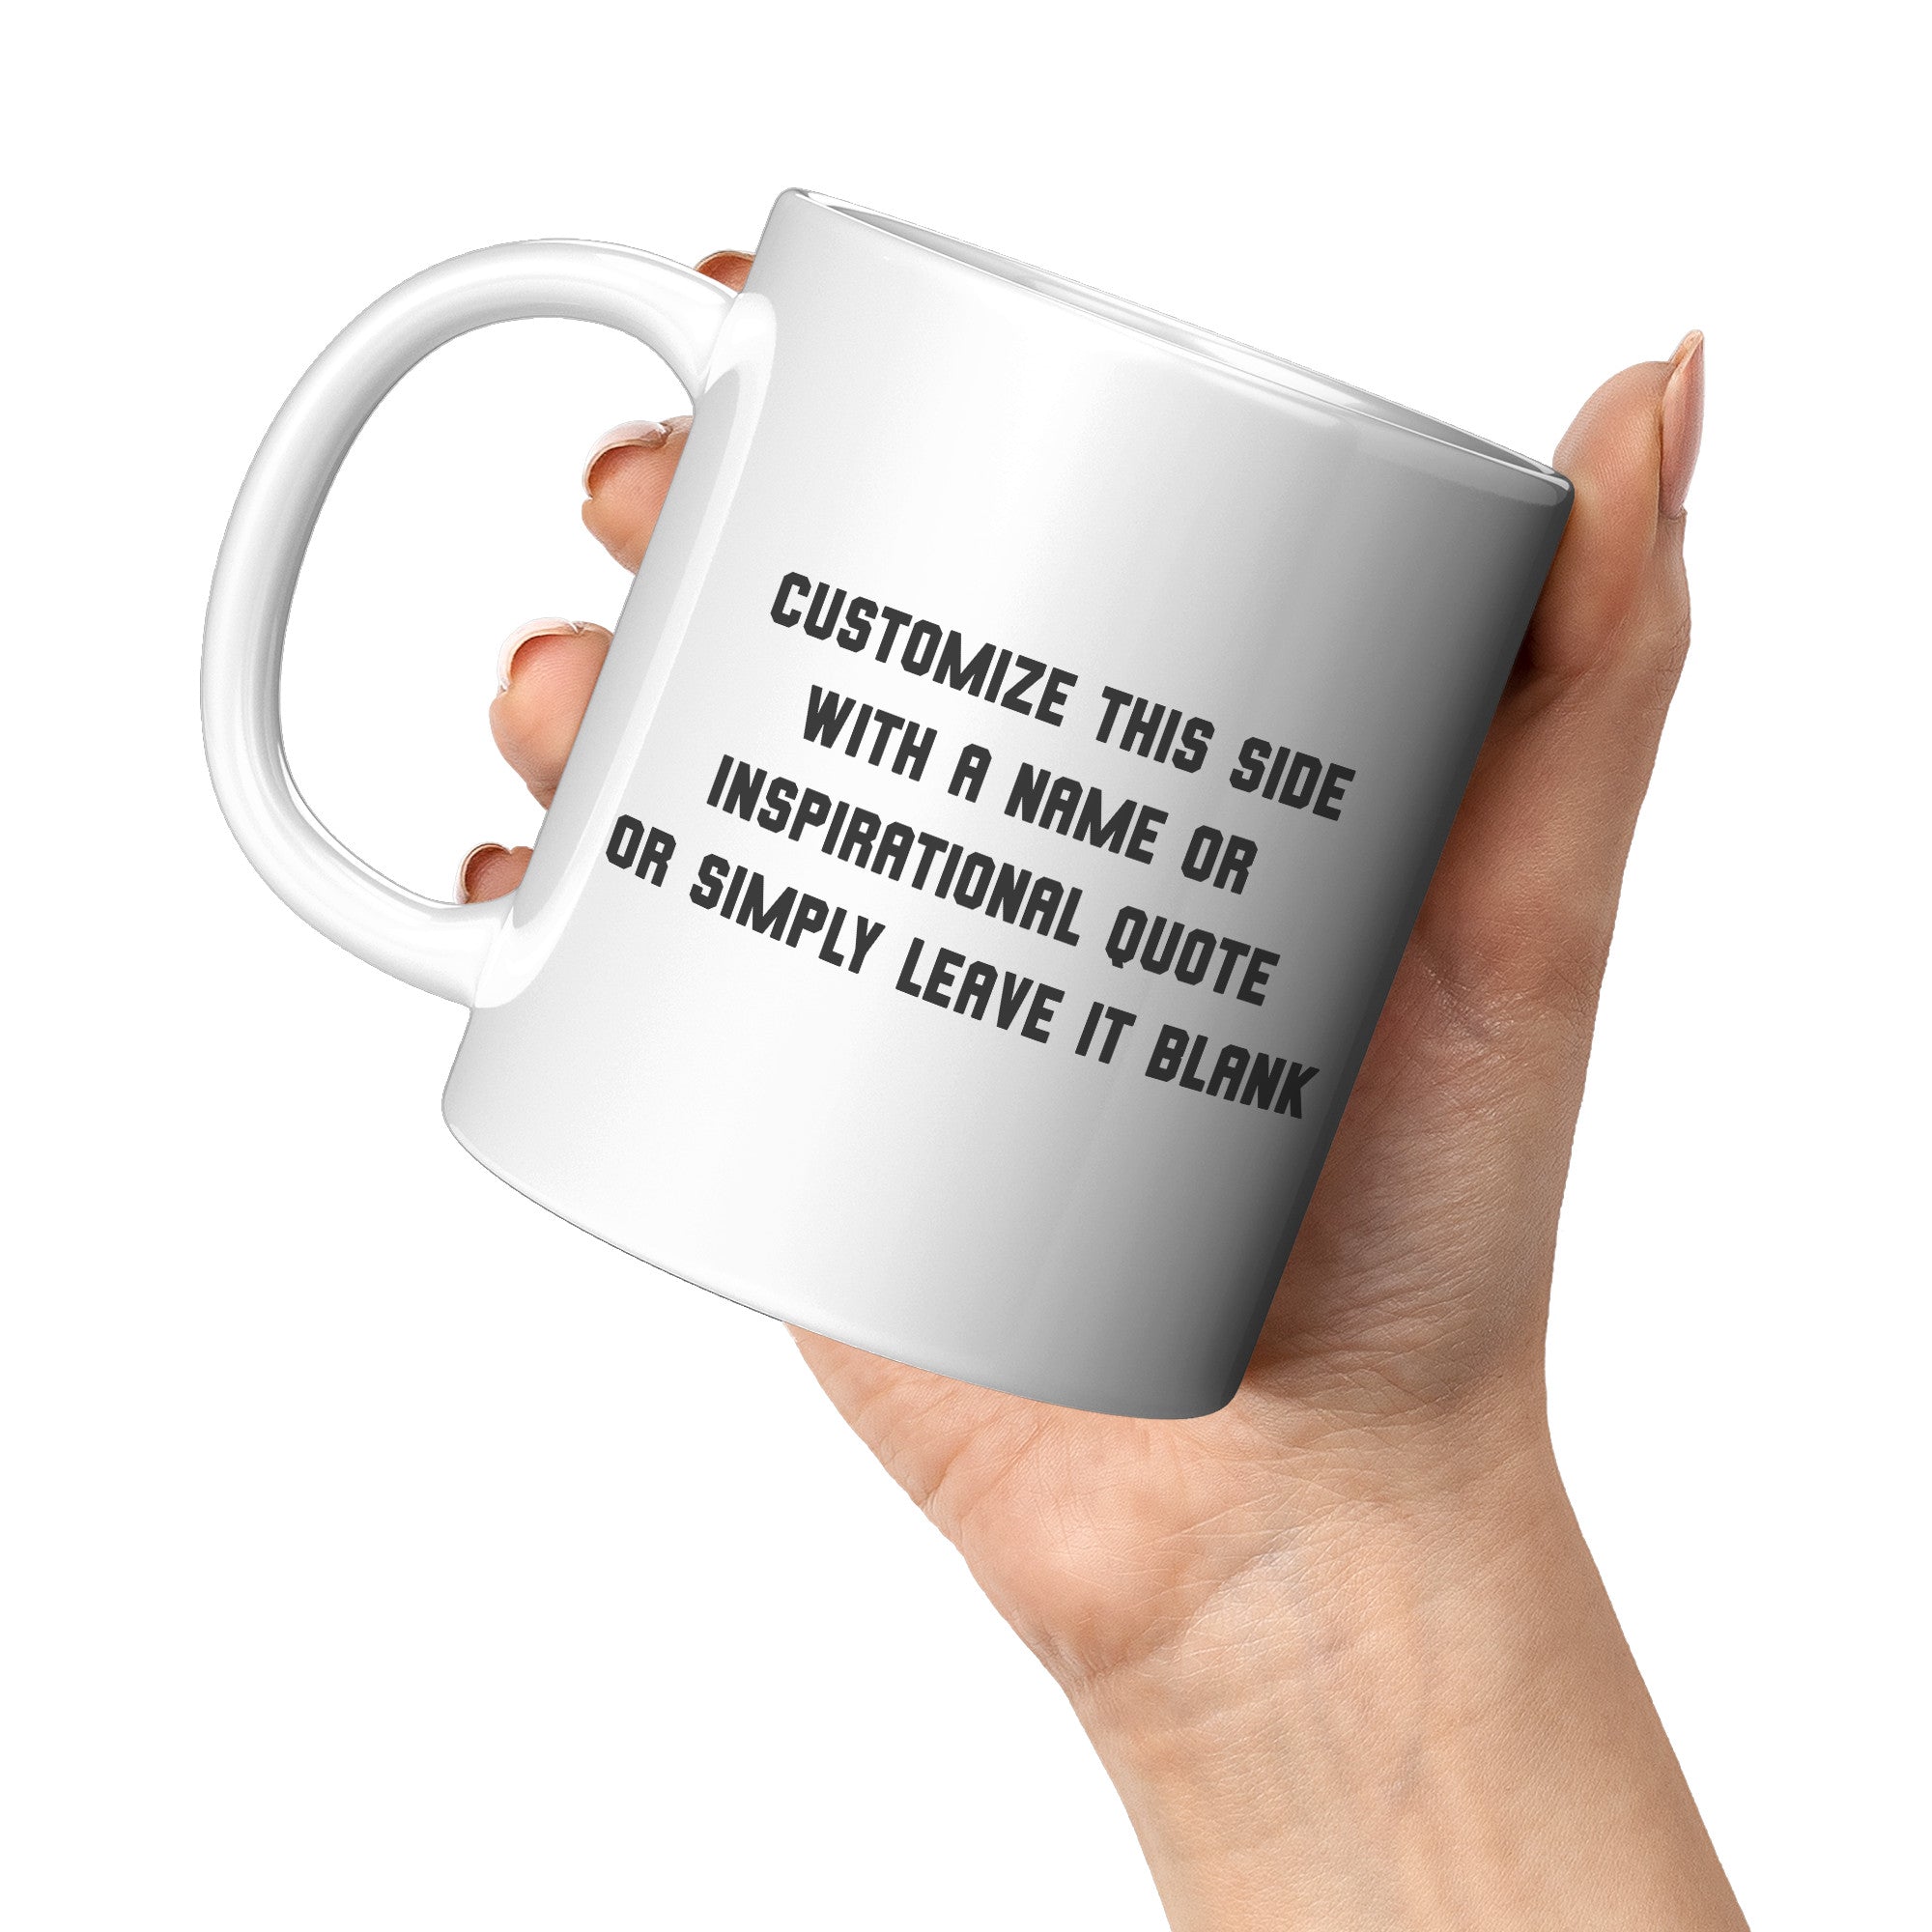 "Female Runner Coffee Mug - Inspirational Running Quotes Cup - Perfect Gift for Women Runners - Motivational Marathoner's Morning Brew" - L